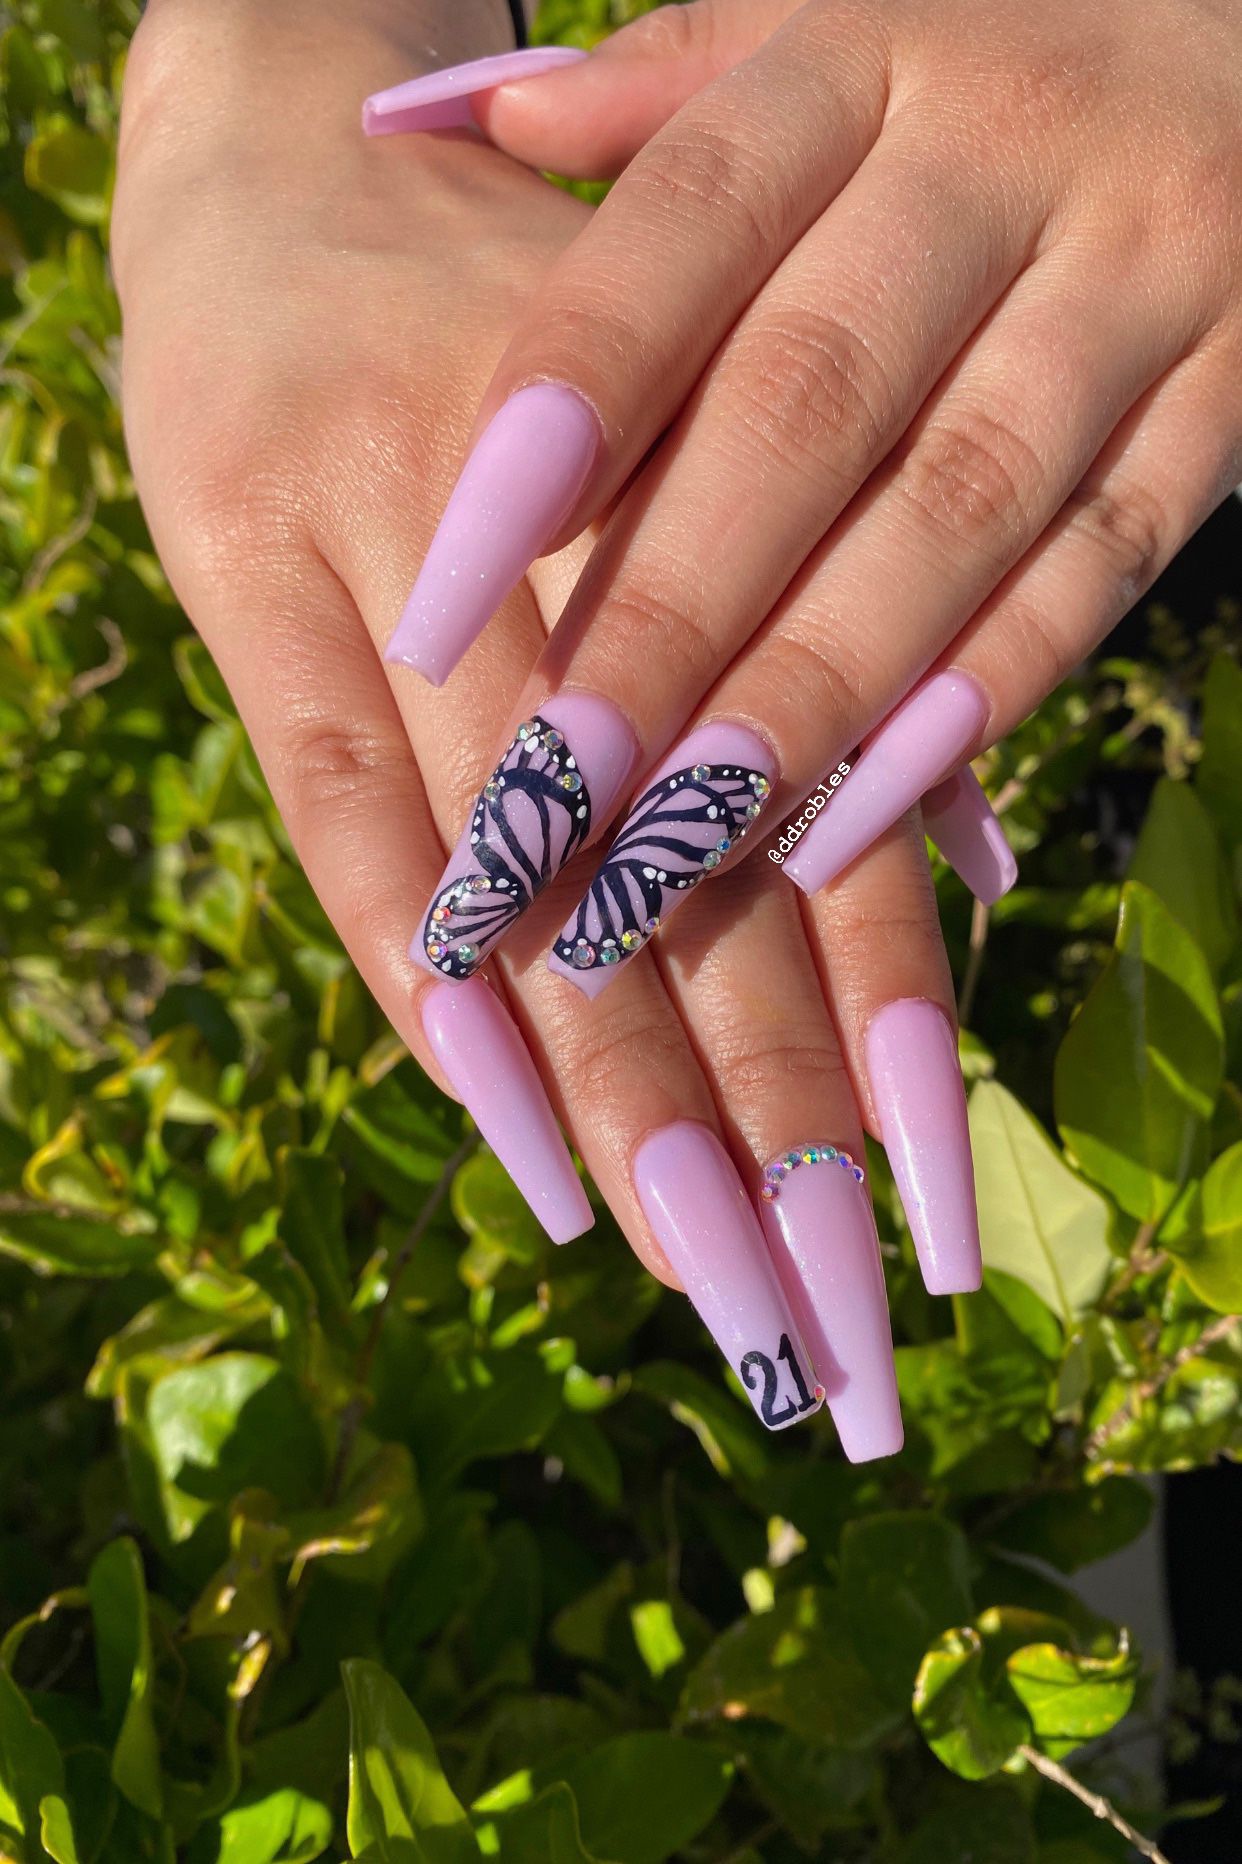 Hand painted Butterfly transition in cotton candy pink + unicorn magic.